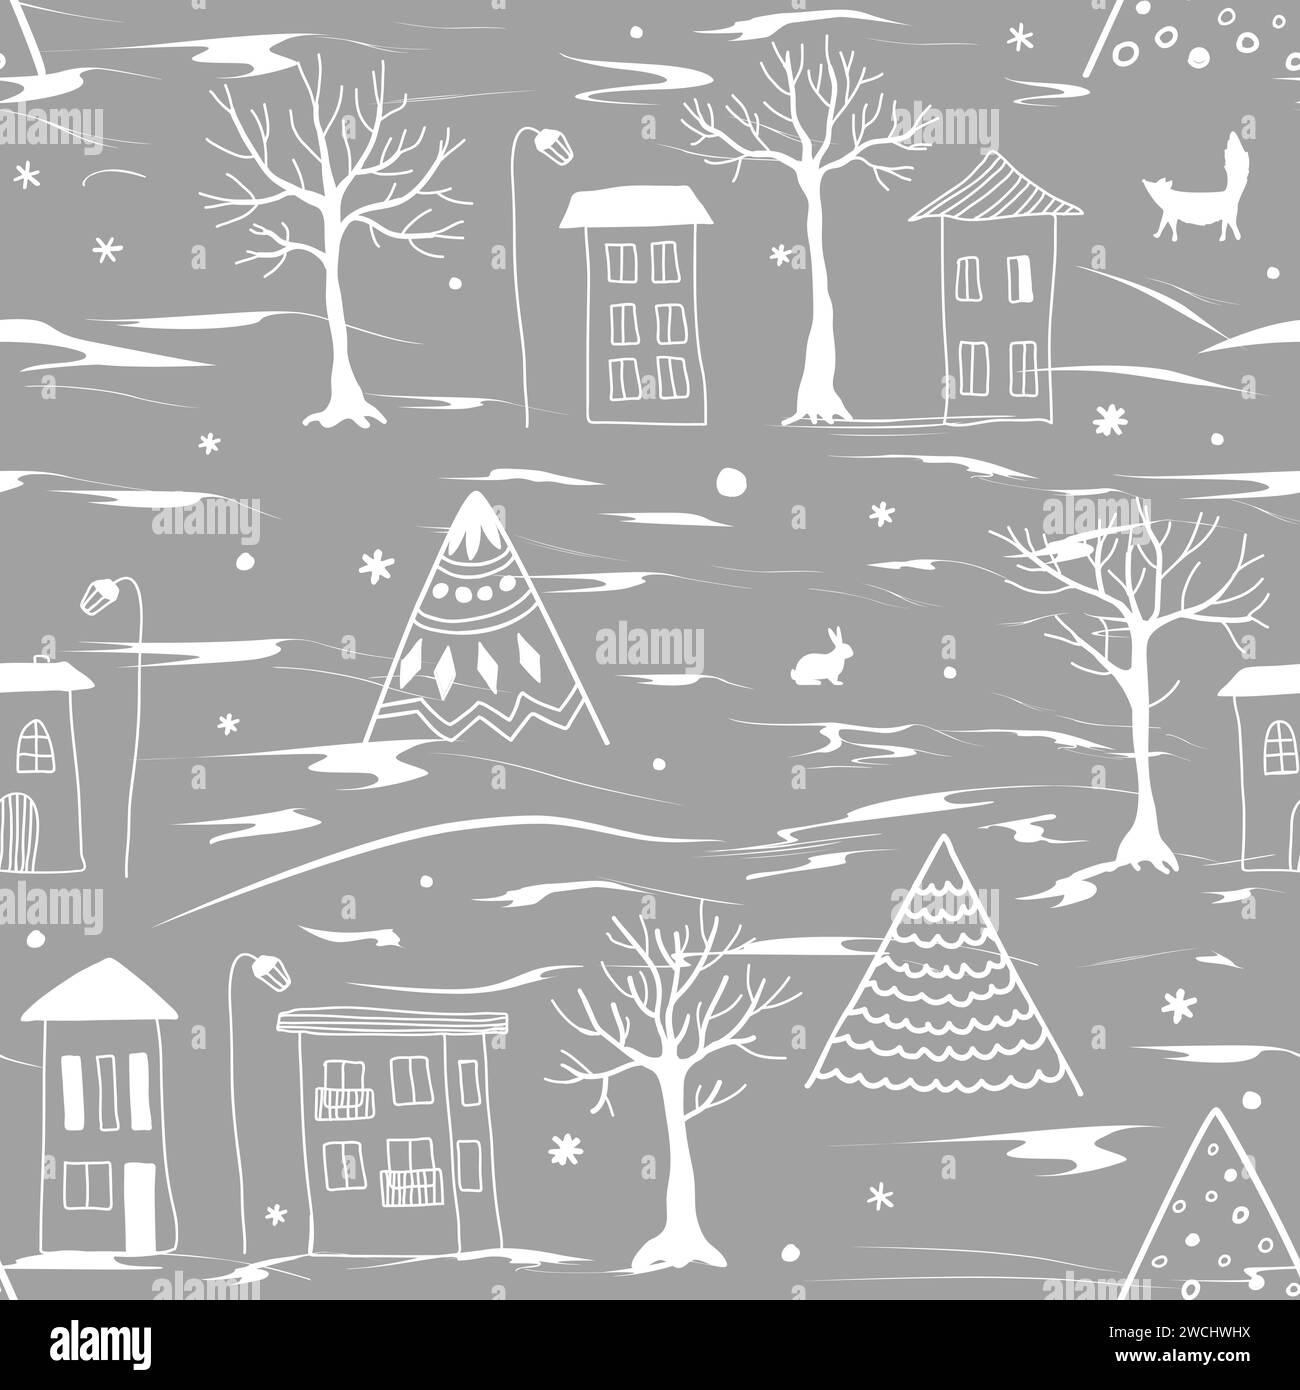 Seamless pattern of doodle hand drawn trees and houses. City landscape. Great for fabric, textile, vector illustration. Stock Vector